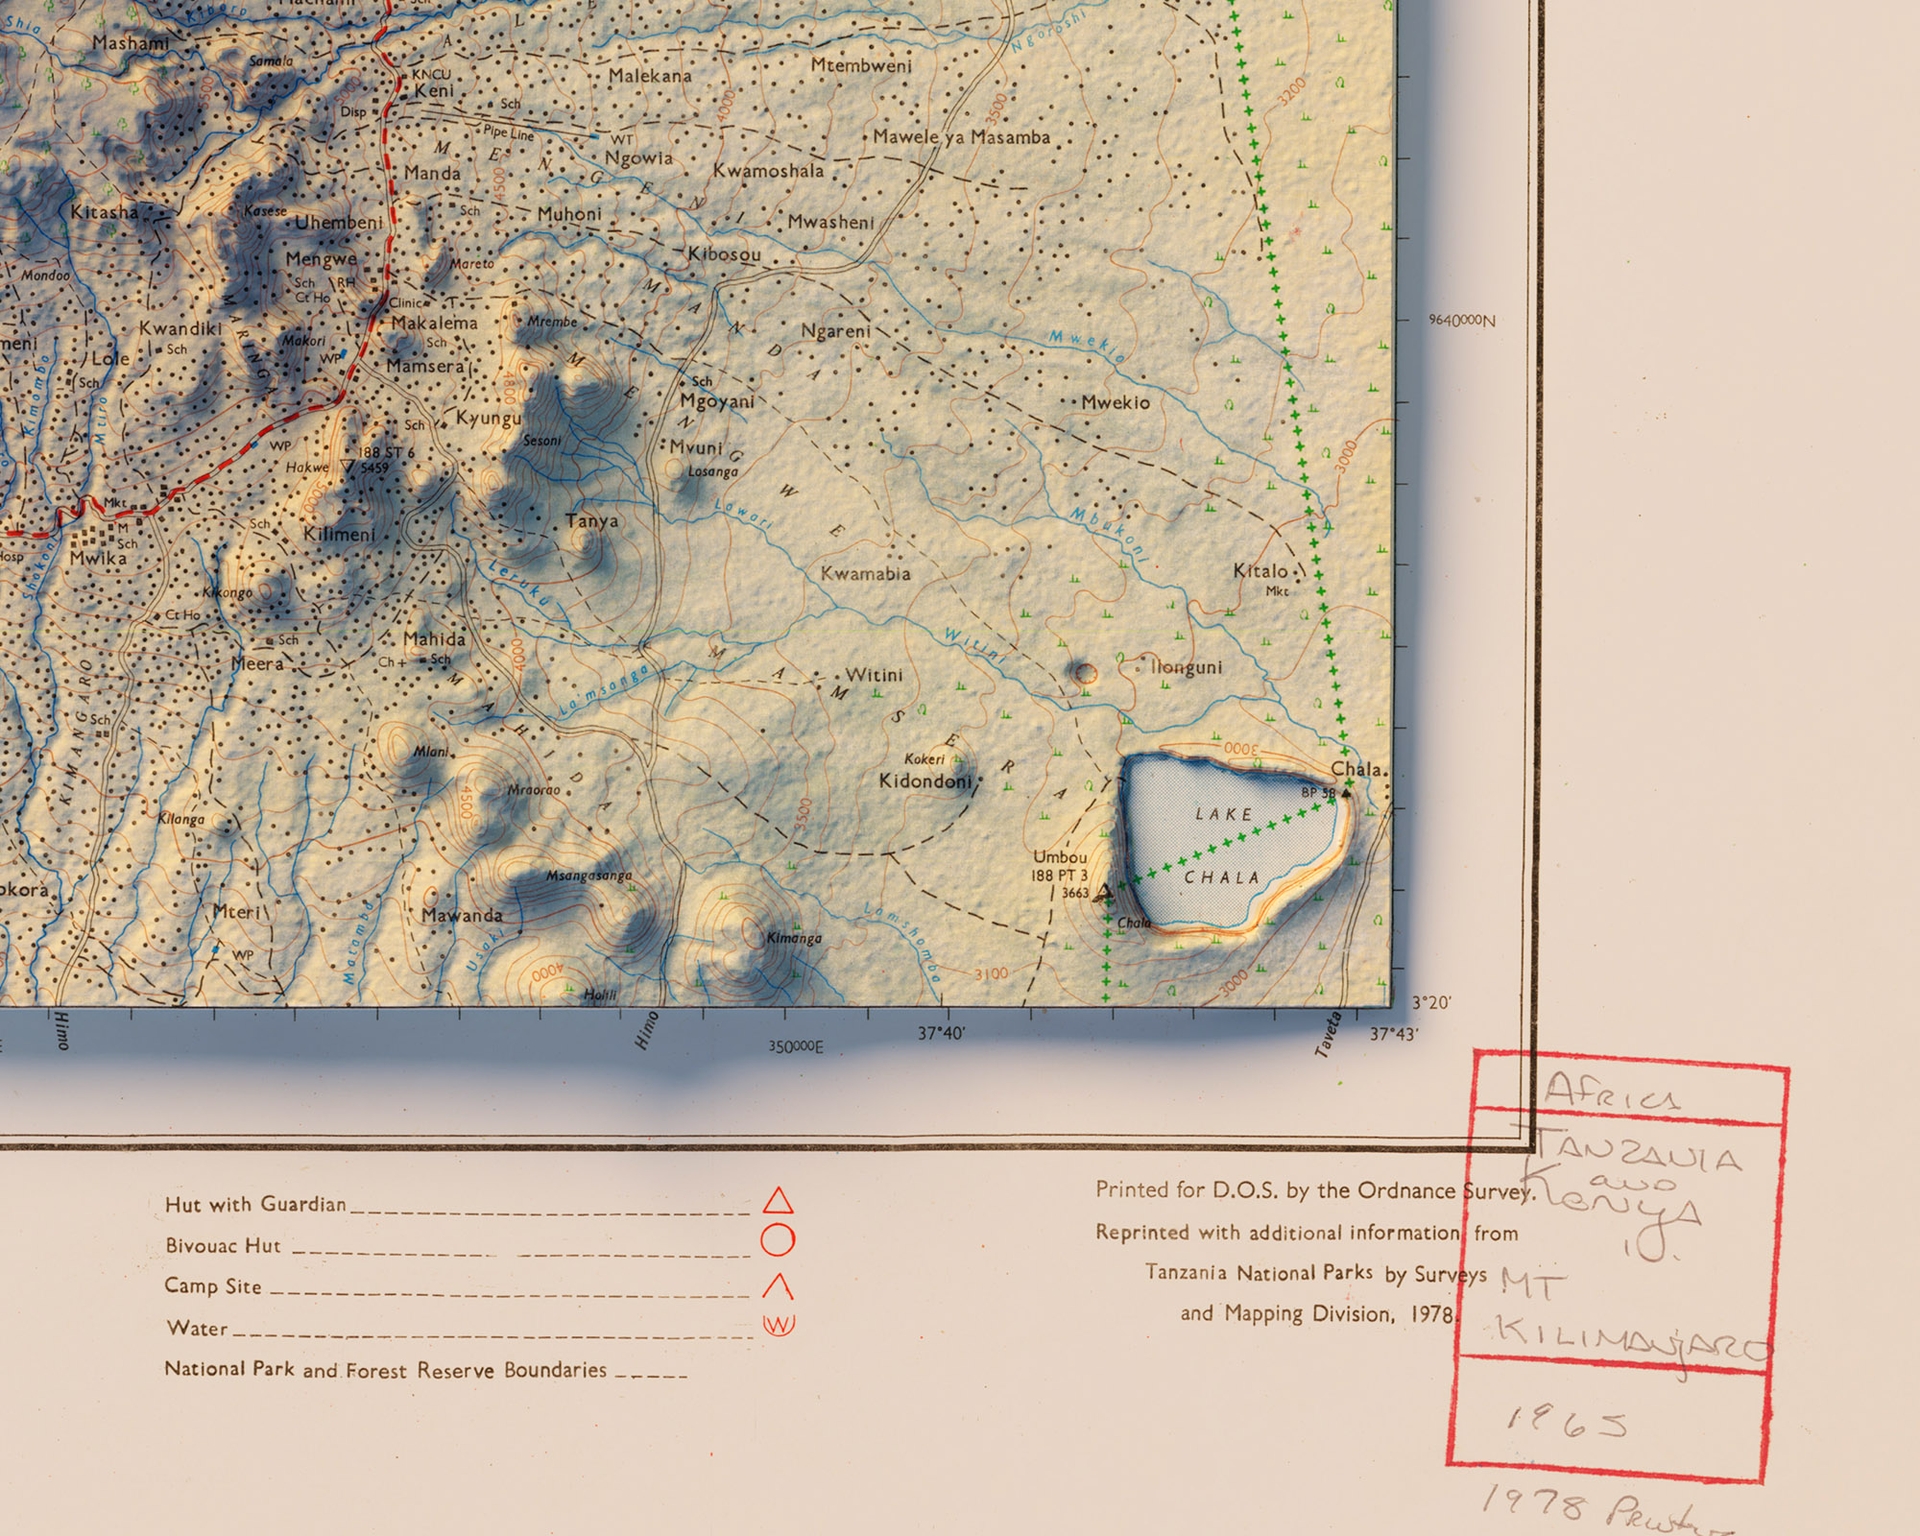 a topographic map image of Kilimanjaro accurately georeferenced